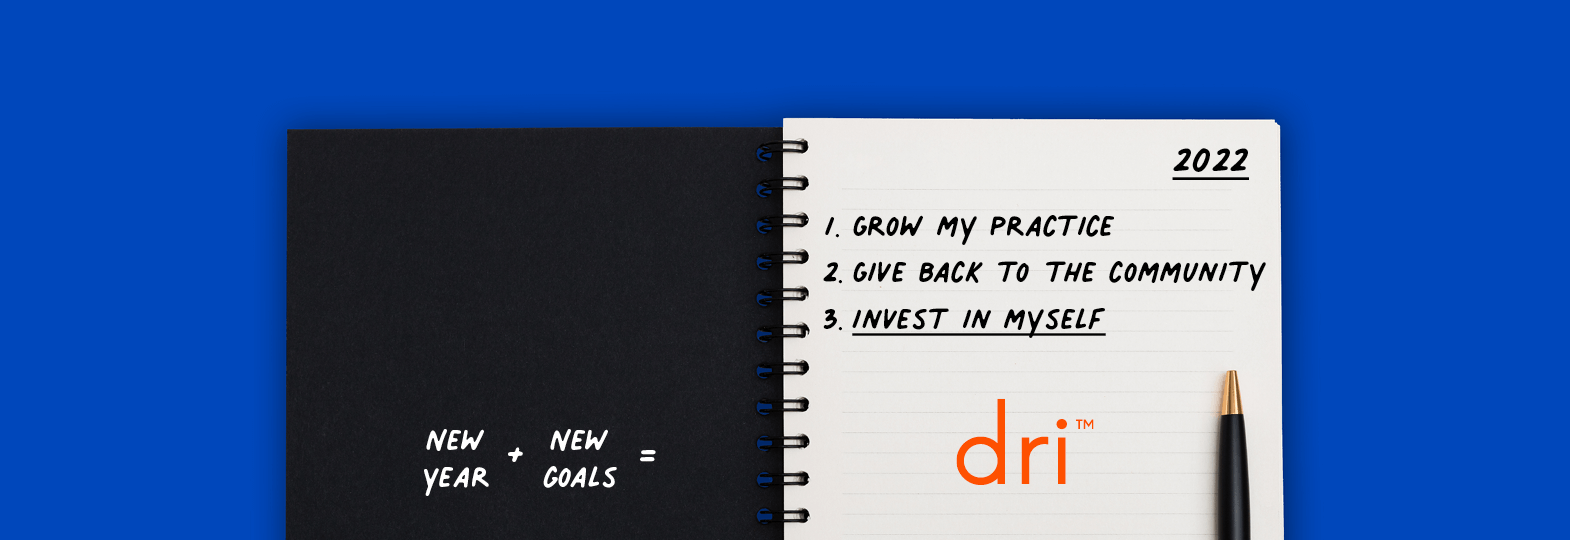 New Year + New Goals = DRI; Grow my Practice, Invest in Myself, Give Back to Community